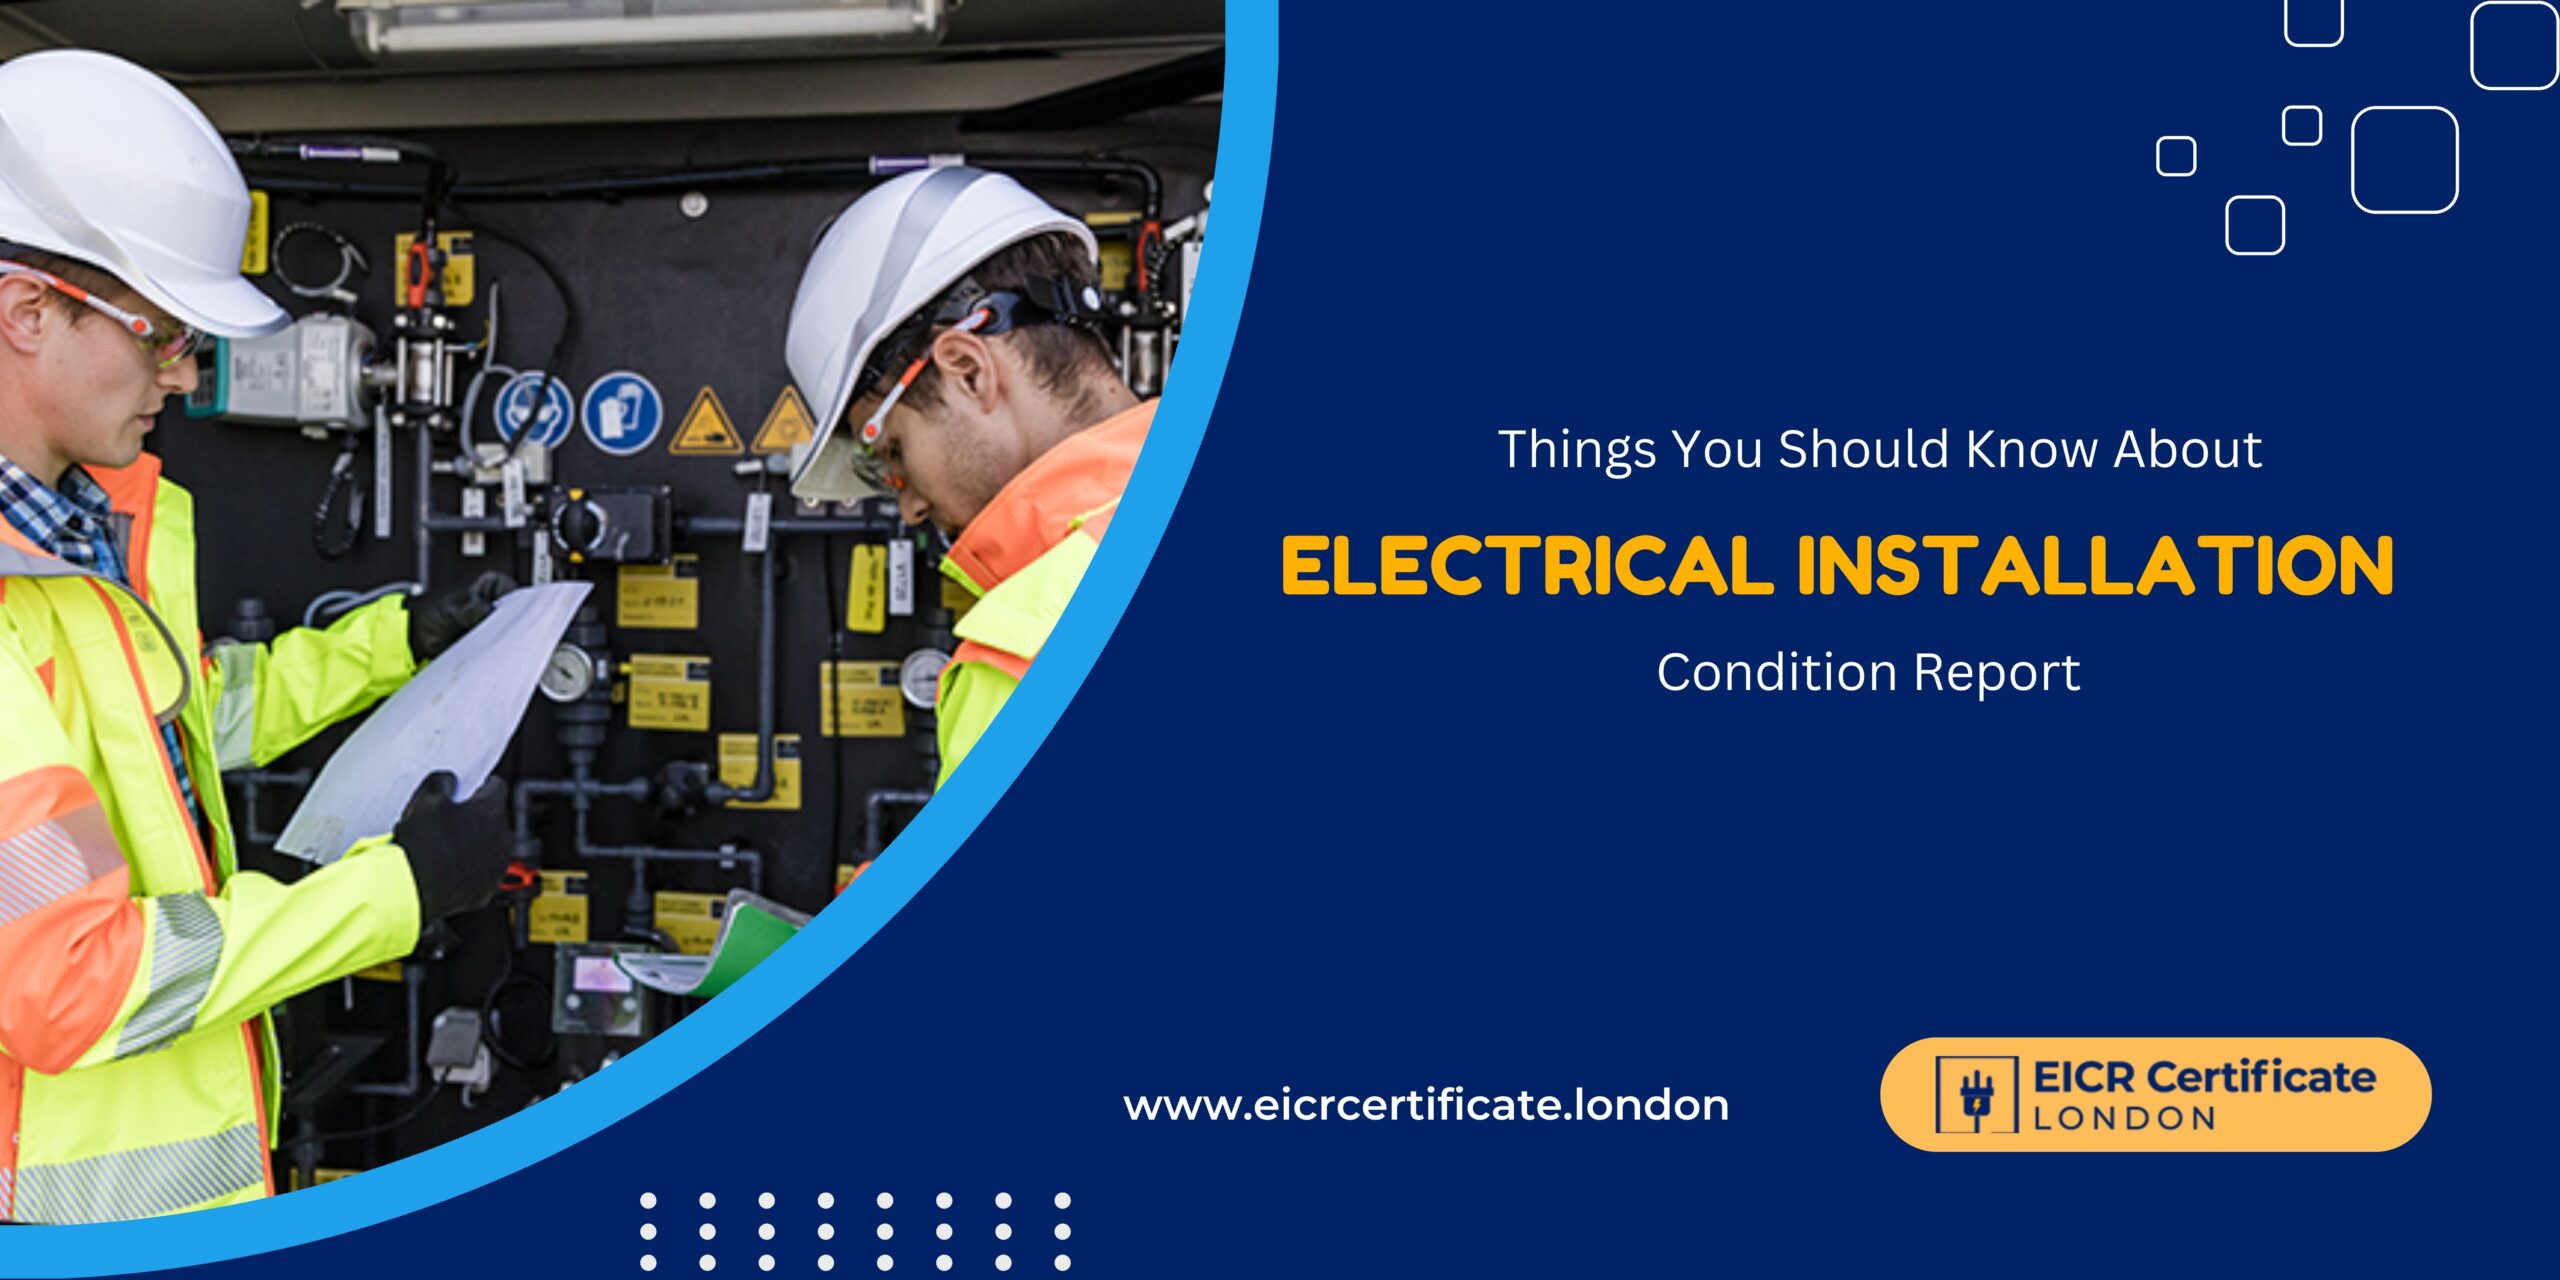 Things You Should Know About Electrical Installation Condition Report